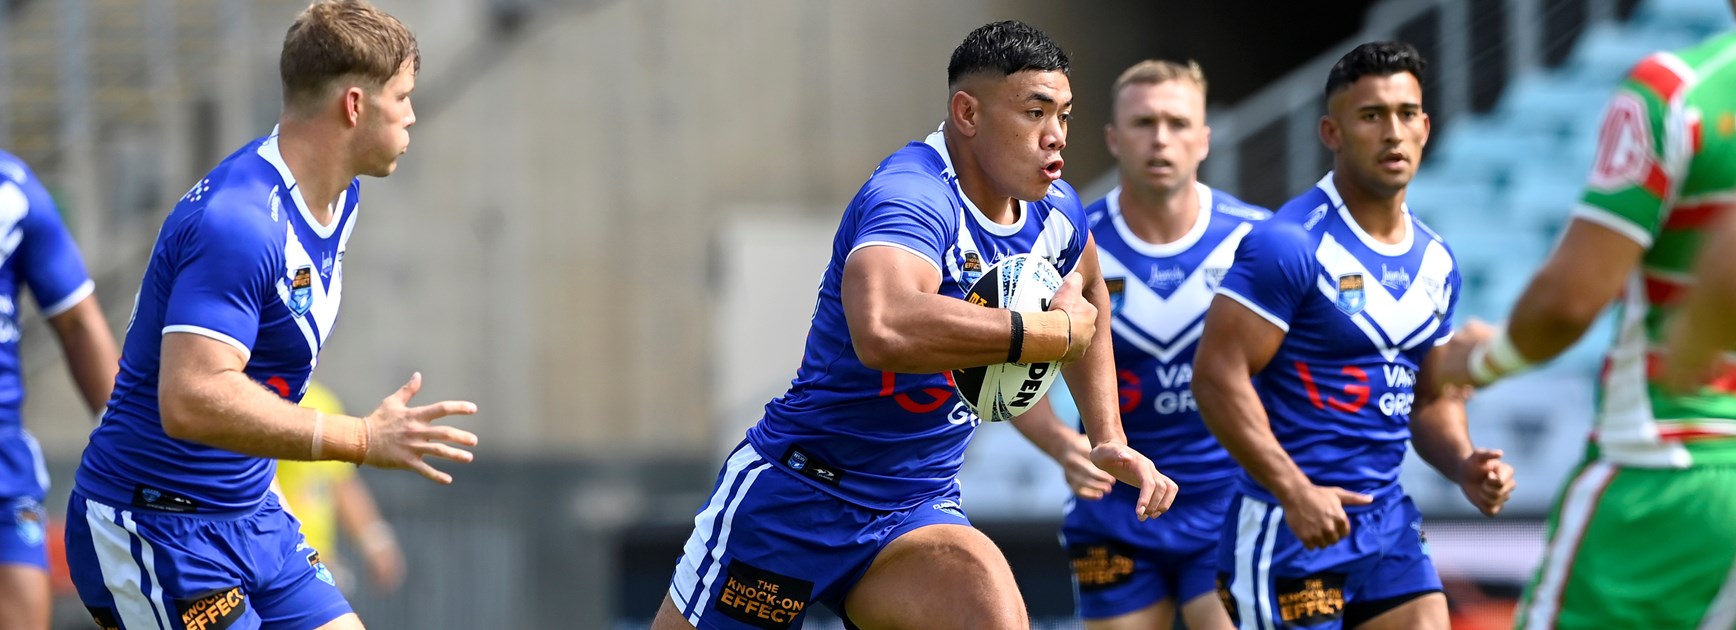 NSW Cup Team News: Round 5 v Roosters